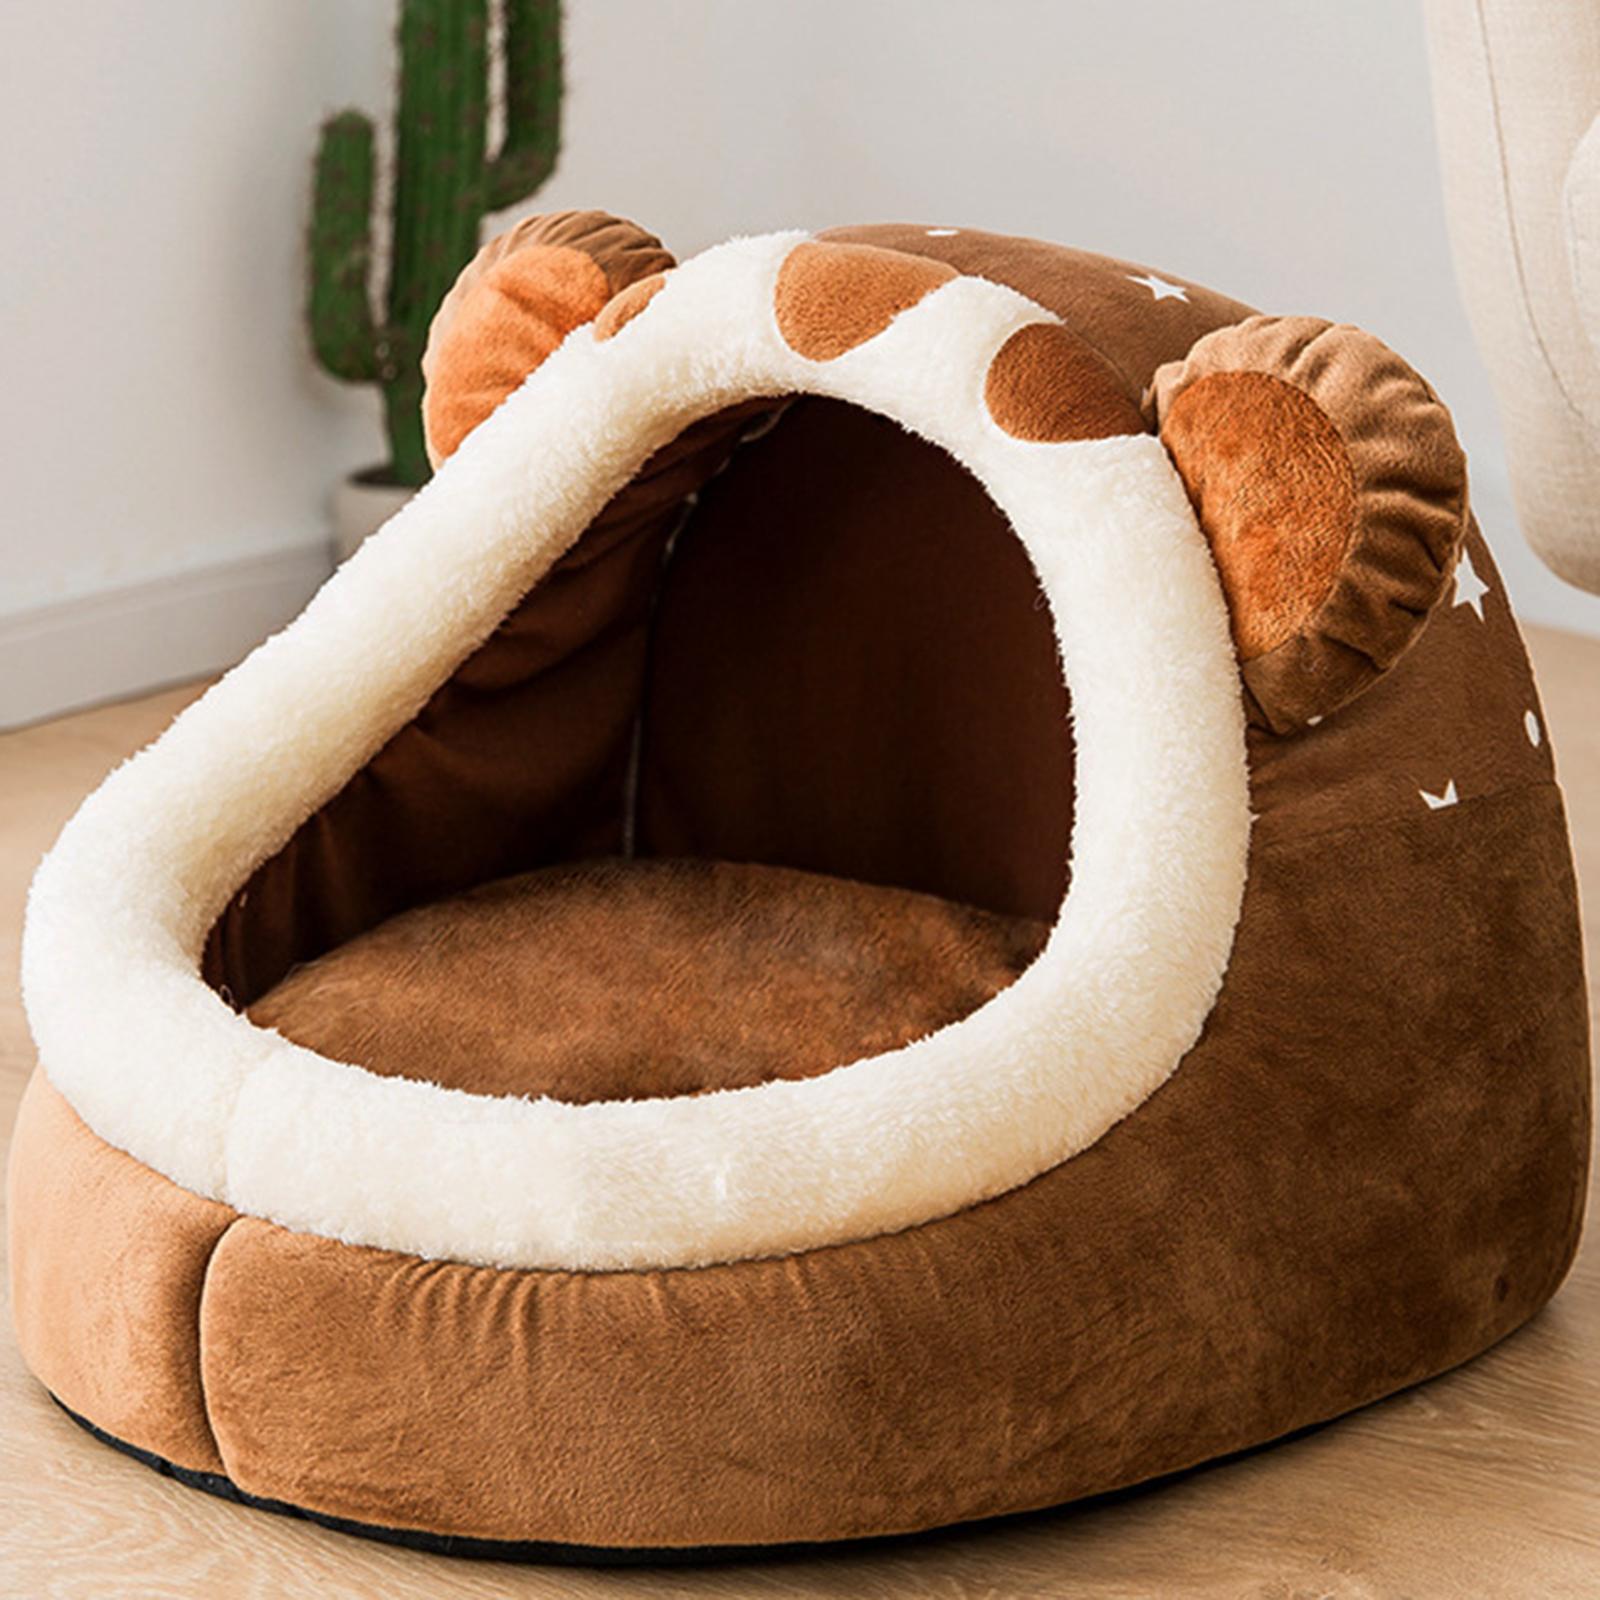 Cute Pet Bed Cat Dog Nest Bed Kennel Warm Comfortable for Kitten Sleeping Brown S